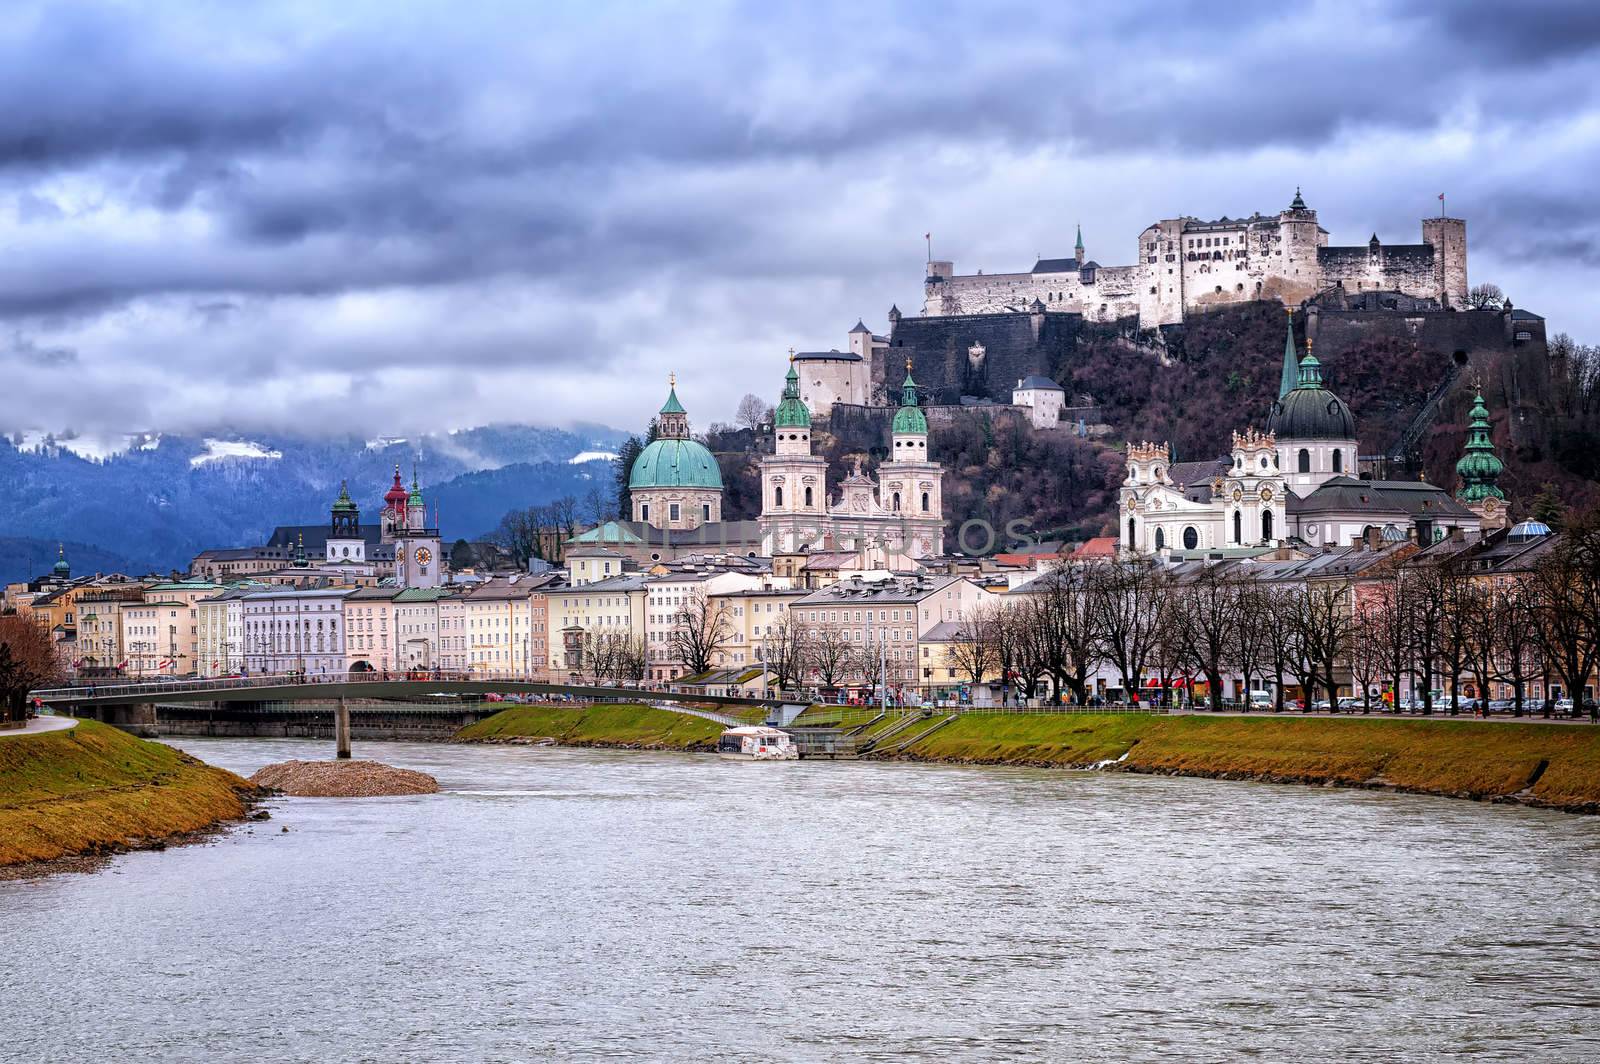 Salzburg, Austria, in the early morning by GlobePhotos